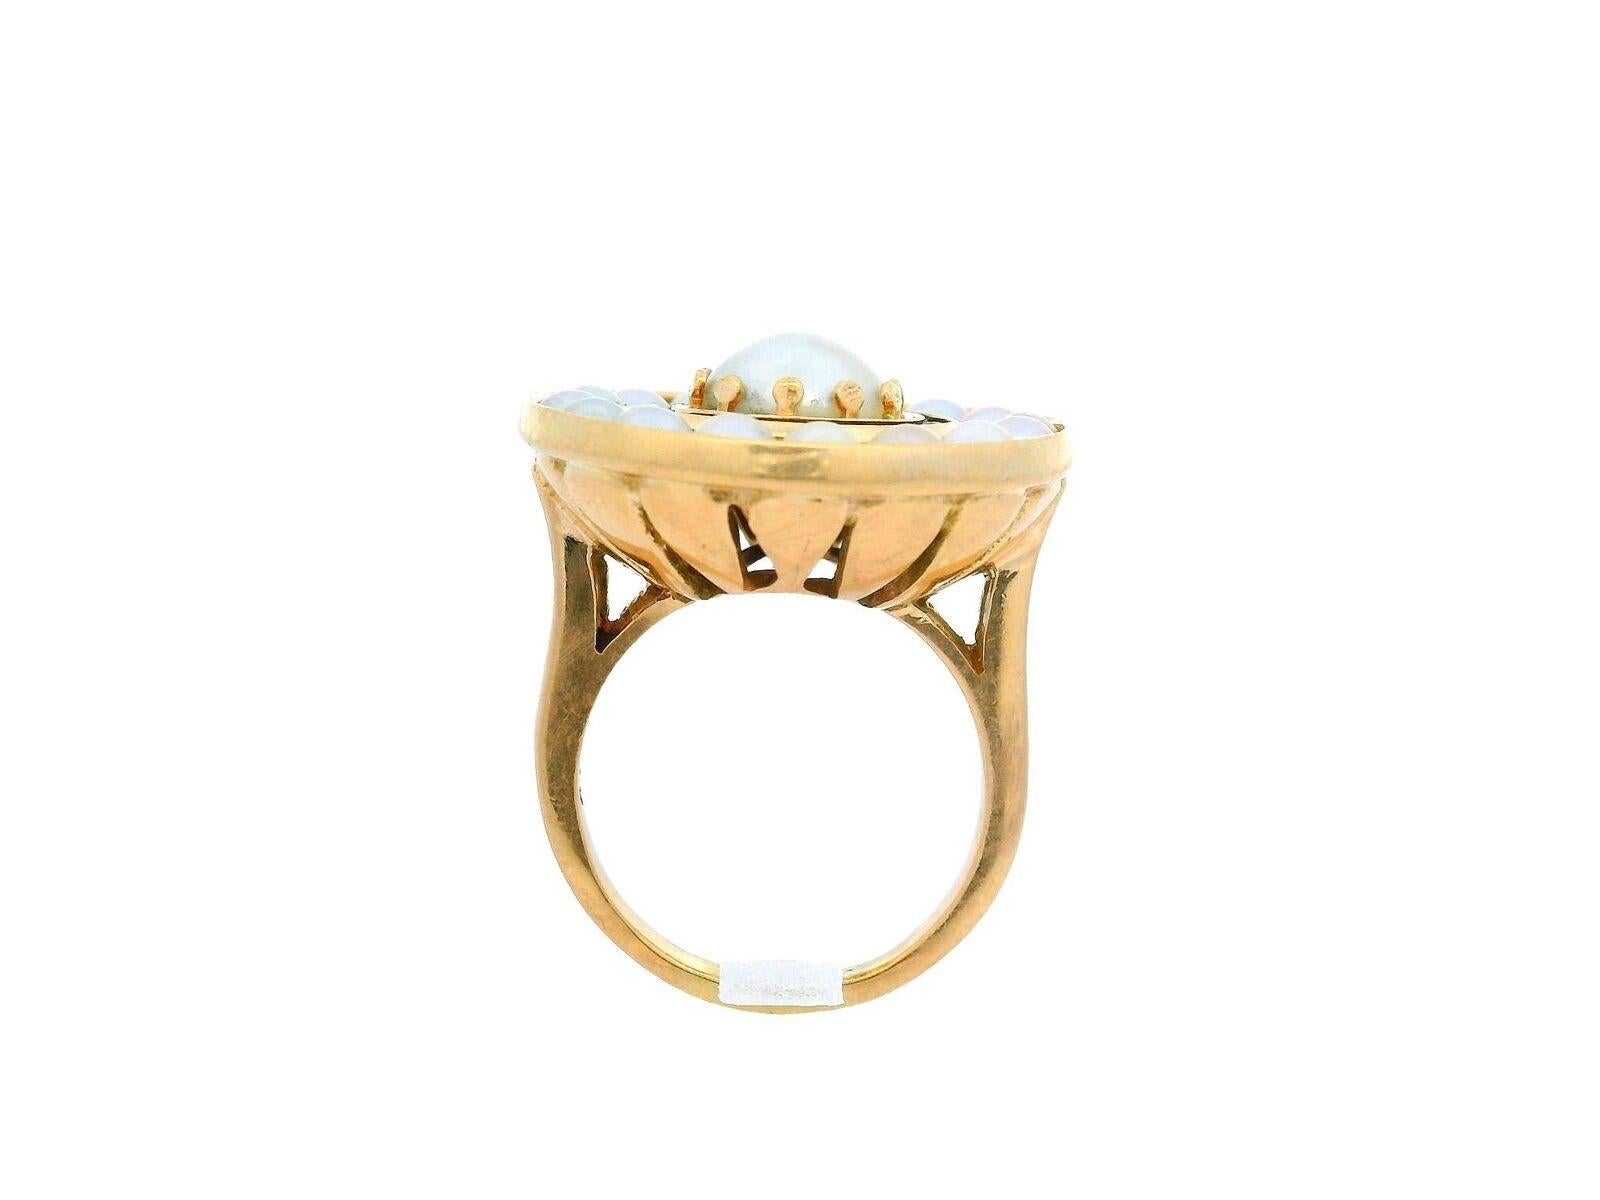 Vintage 14k Yellow Gold Cultured Pearl & Garnet Round Platter Target Ring In Excellent Condition For Sale In Montclair, NJ